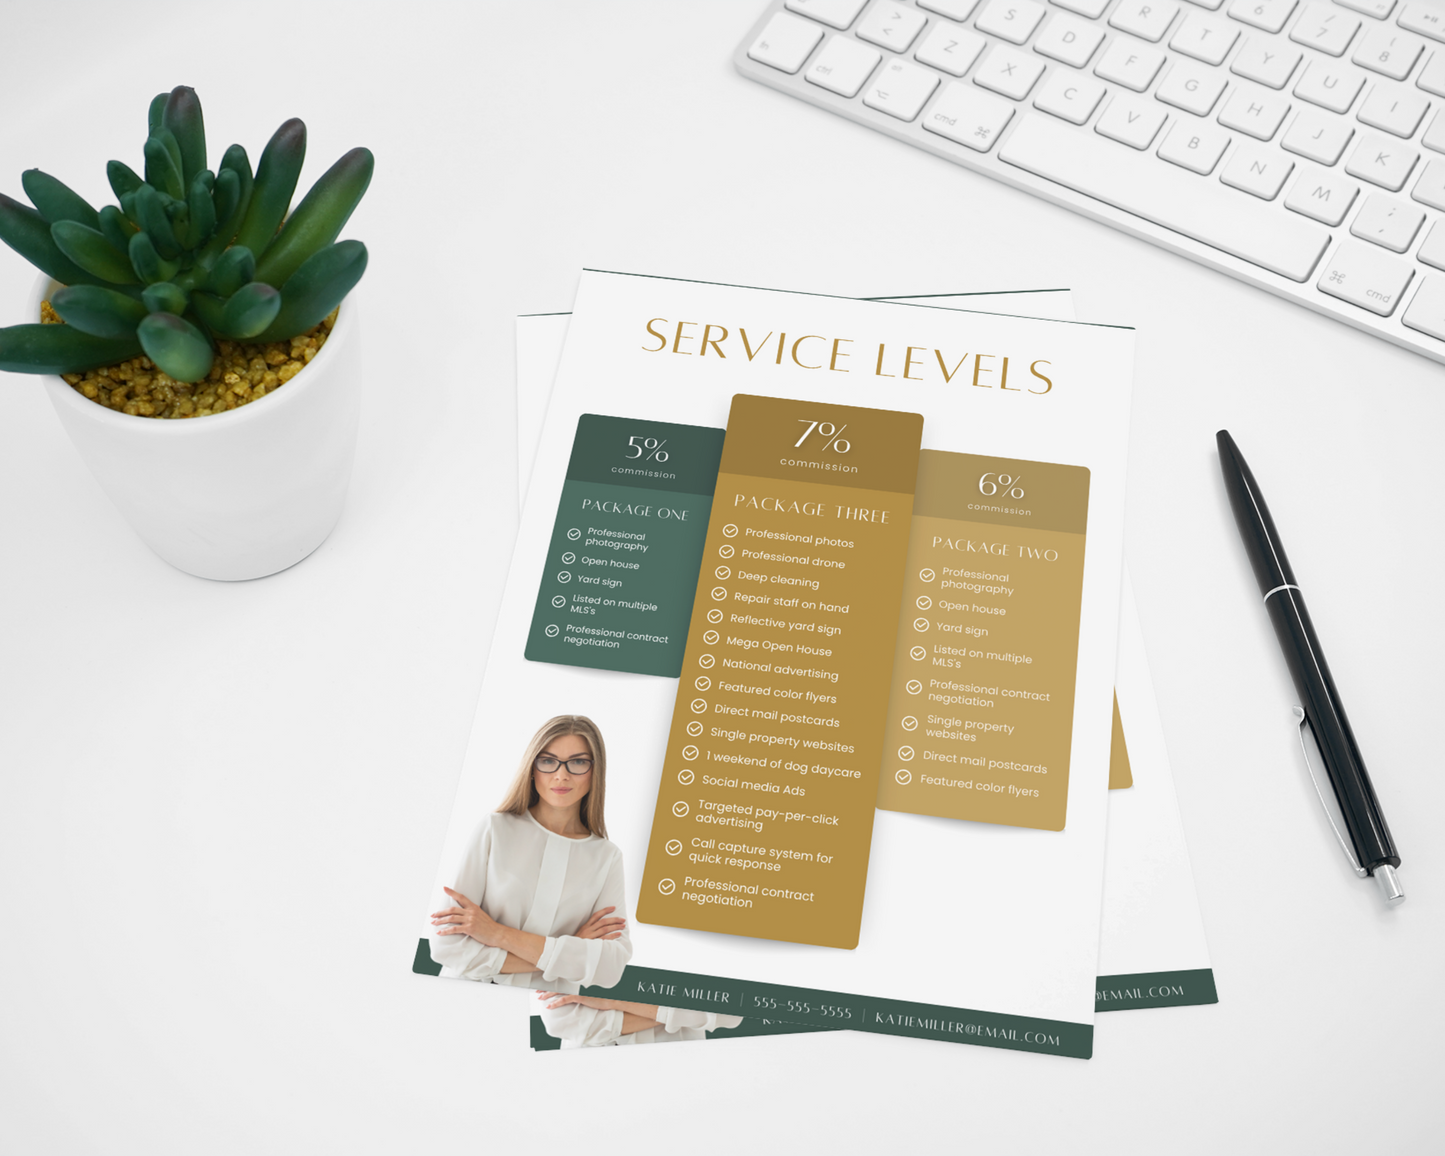 commission sheets,home seller guide,home seller packet,listing appointment,listing commission,listing presentation,luxury real estate,new agent template,printable flyer,real estate flyer,real estate template,realtor commission,realtor marketing